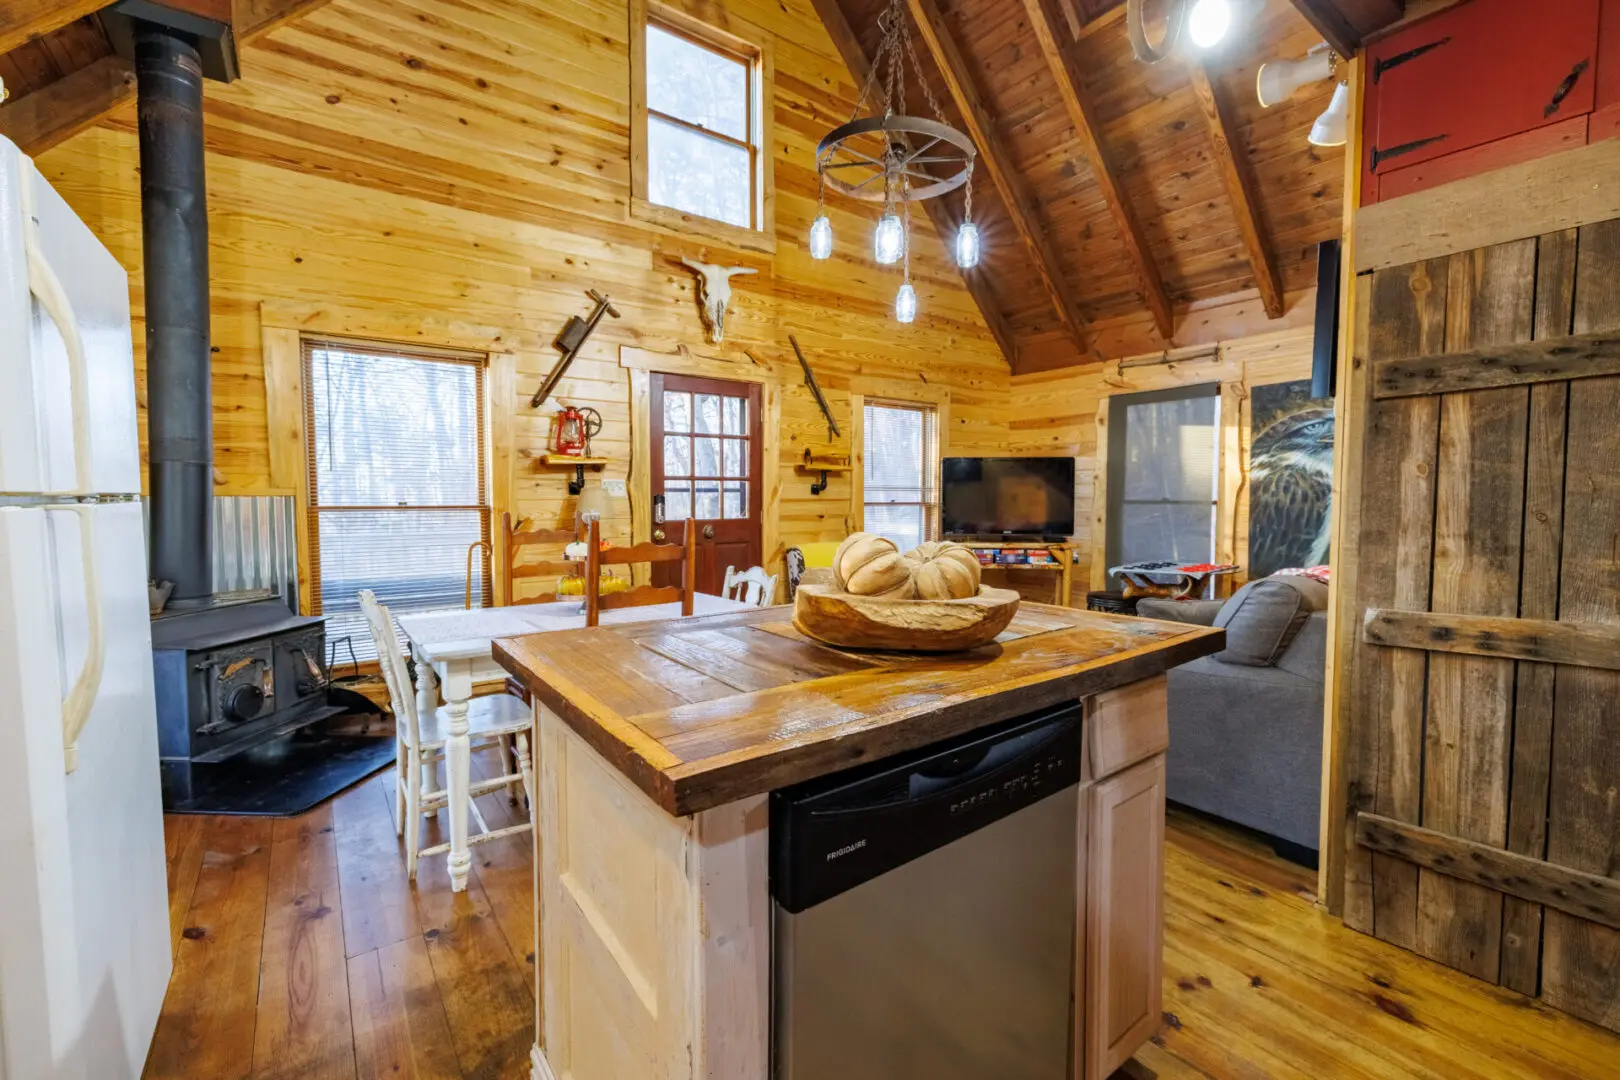 A cozy kitchen in a log cabin with a stove and oven, perfect for a relaxing vacation.